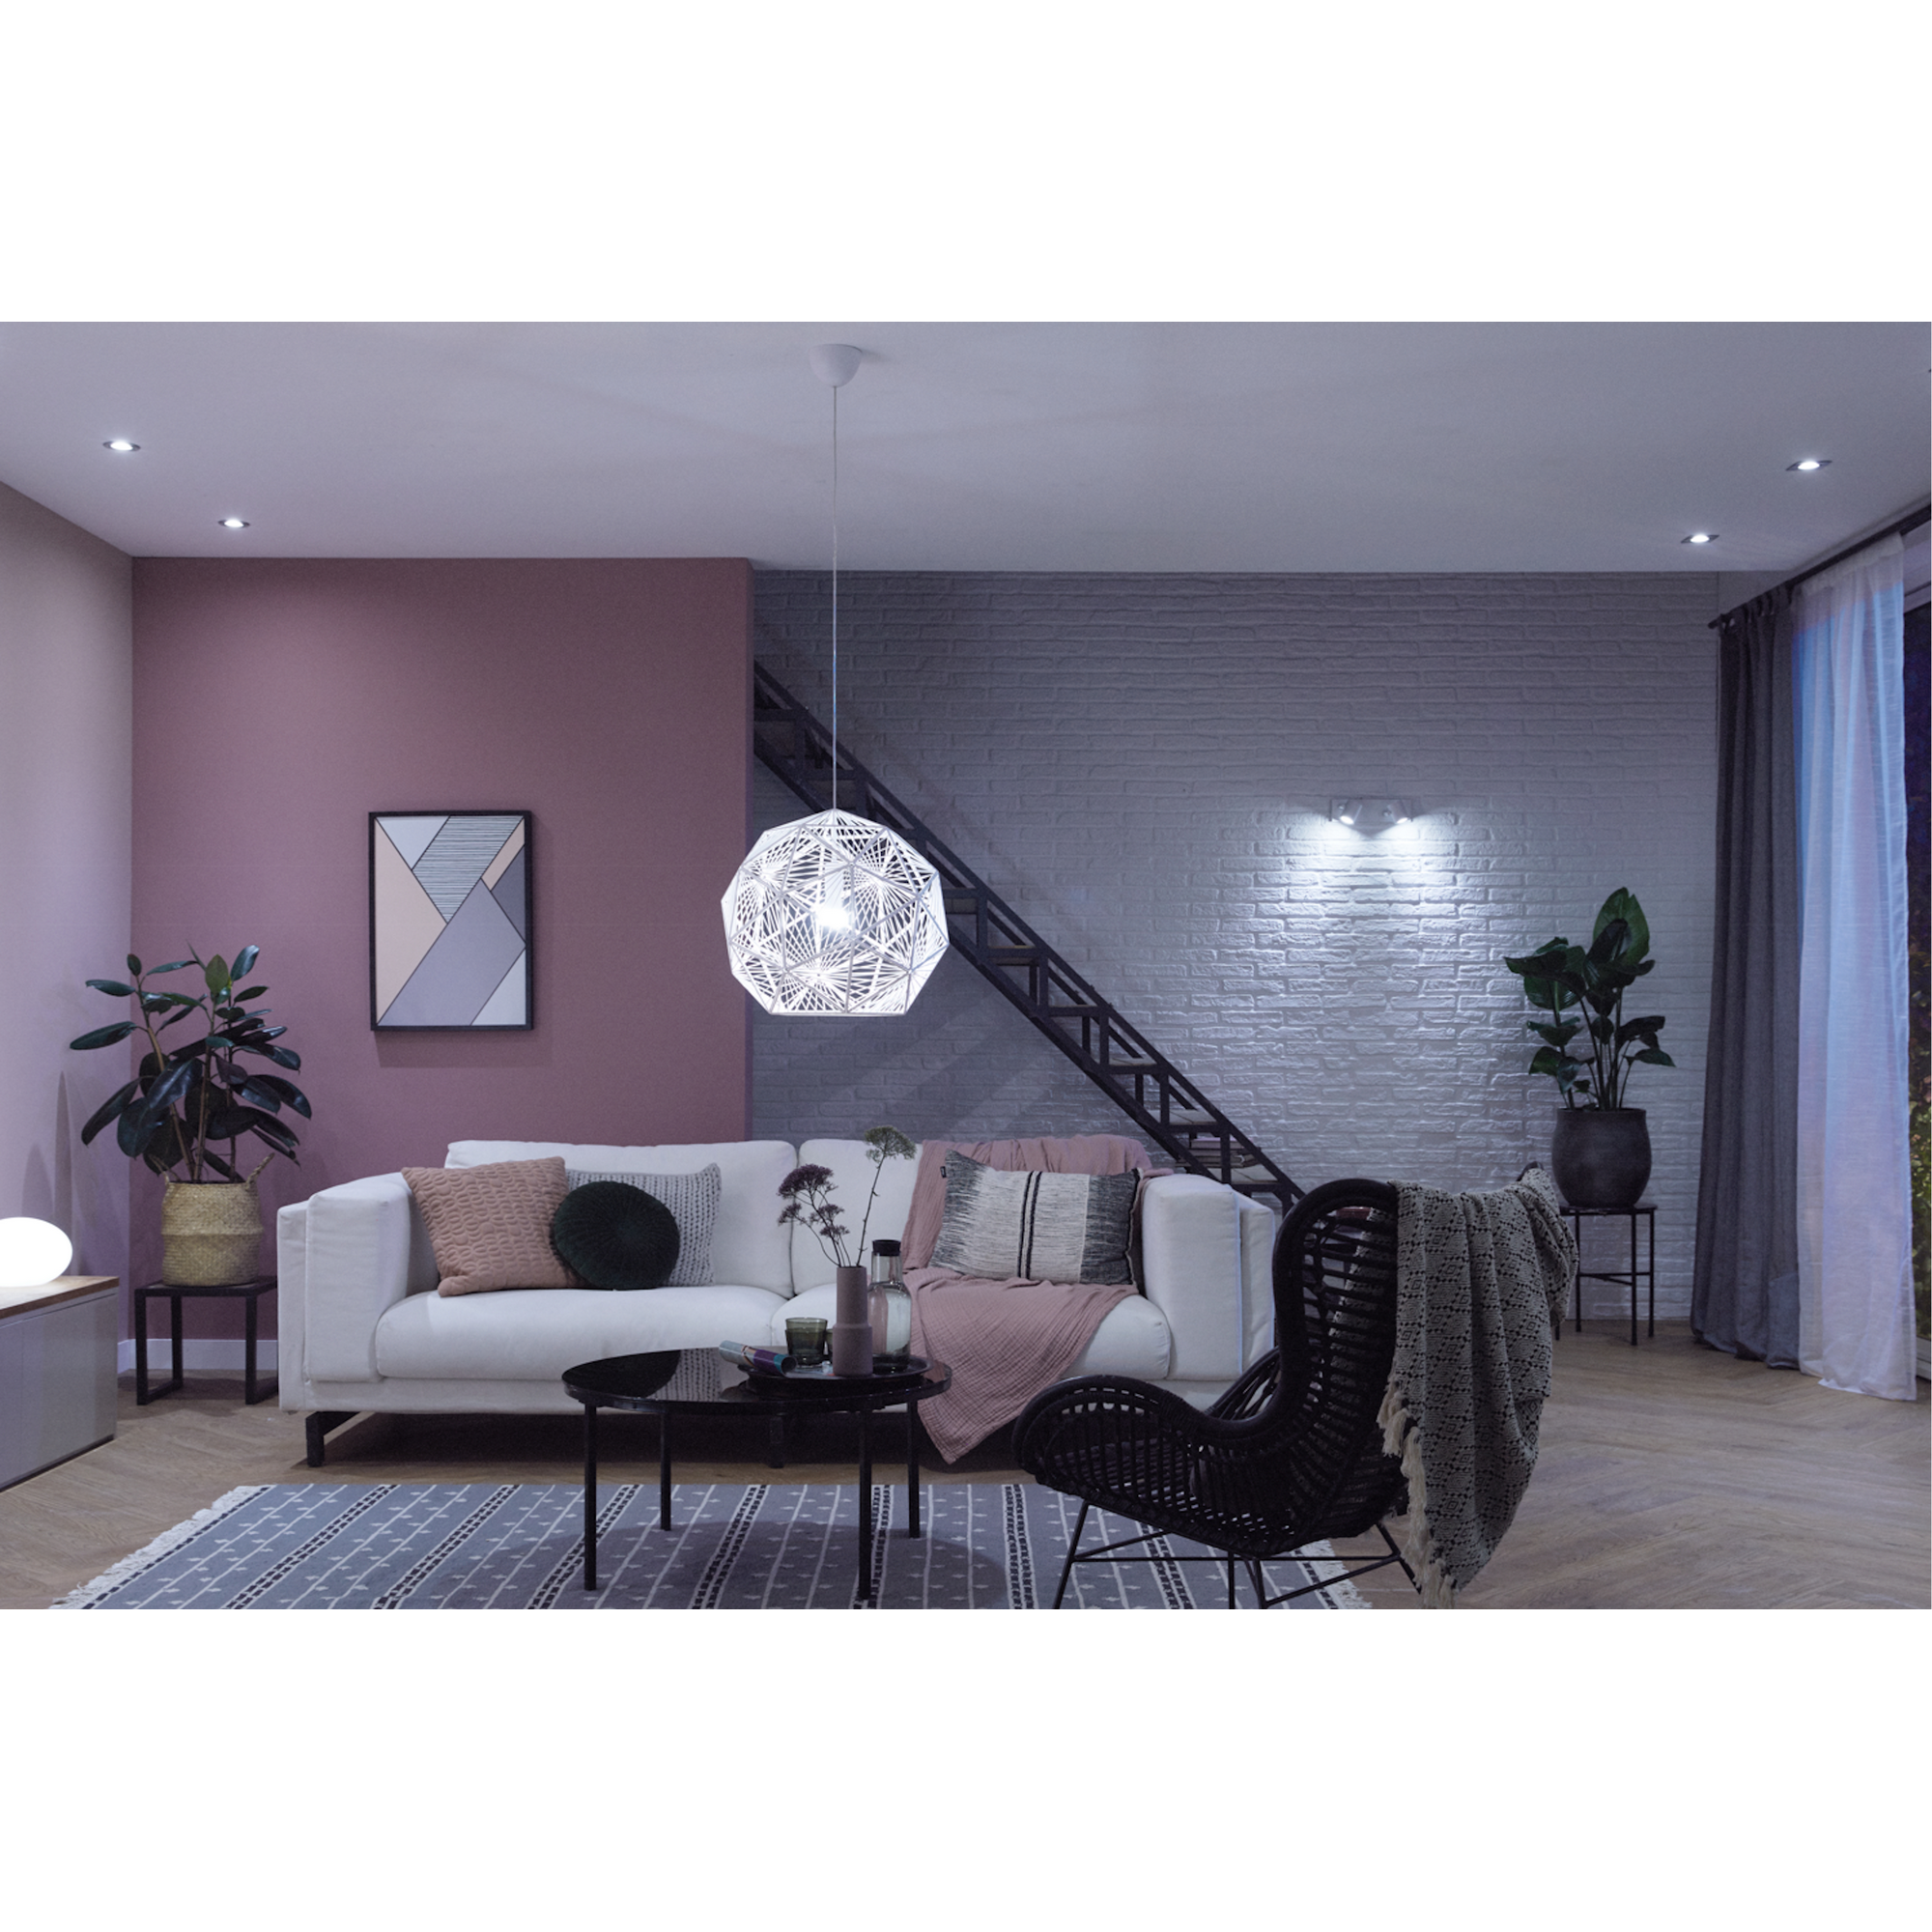 LED-Lampe 'Hue White Ambiance' E27 8 W, 2er-Pack + product picture